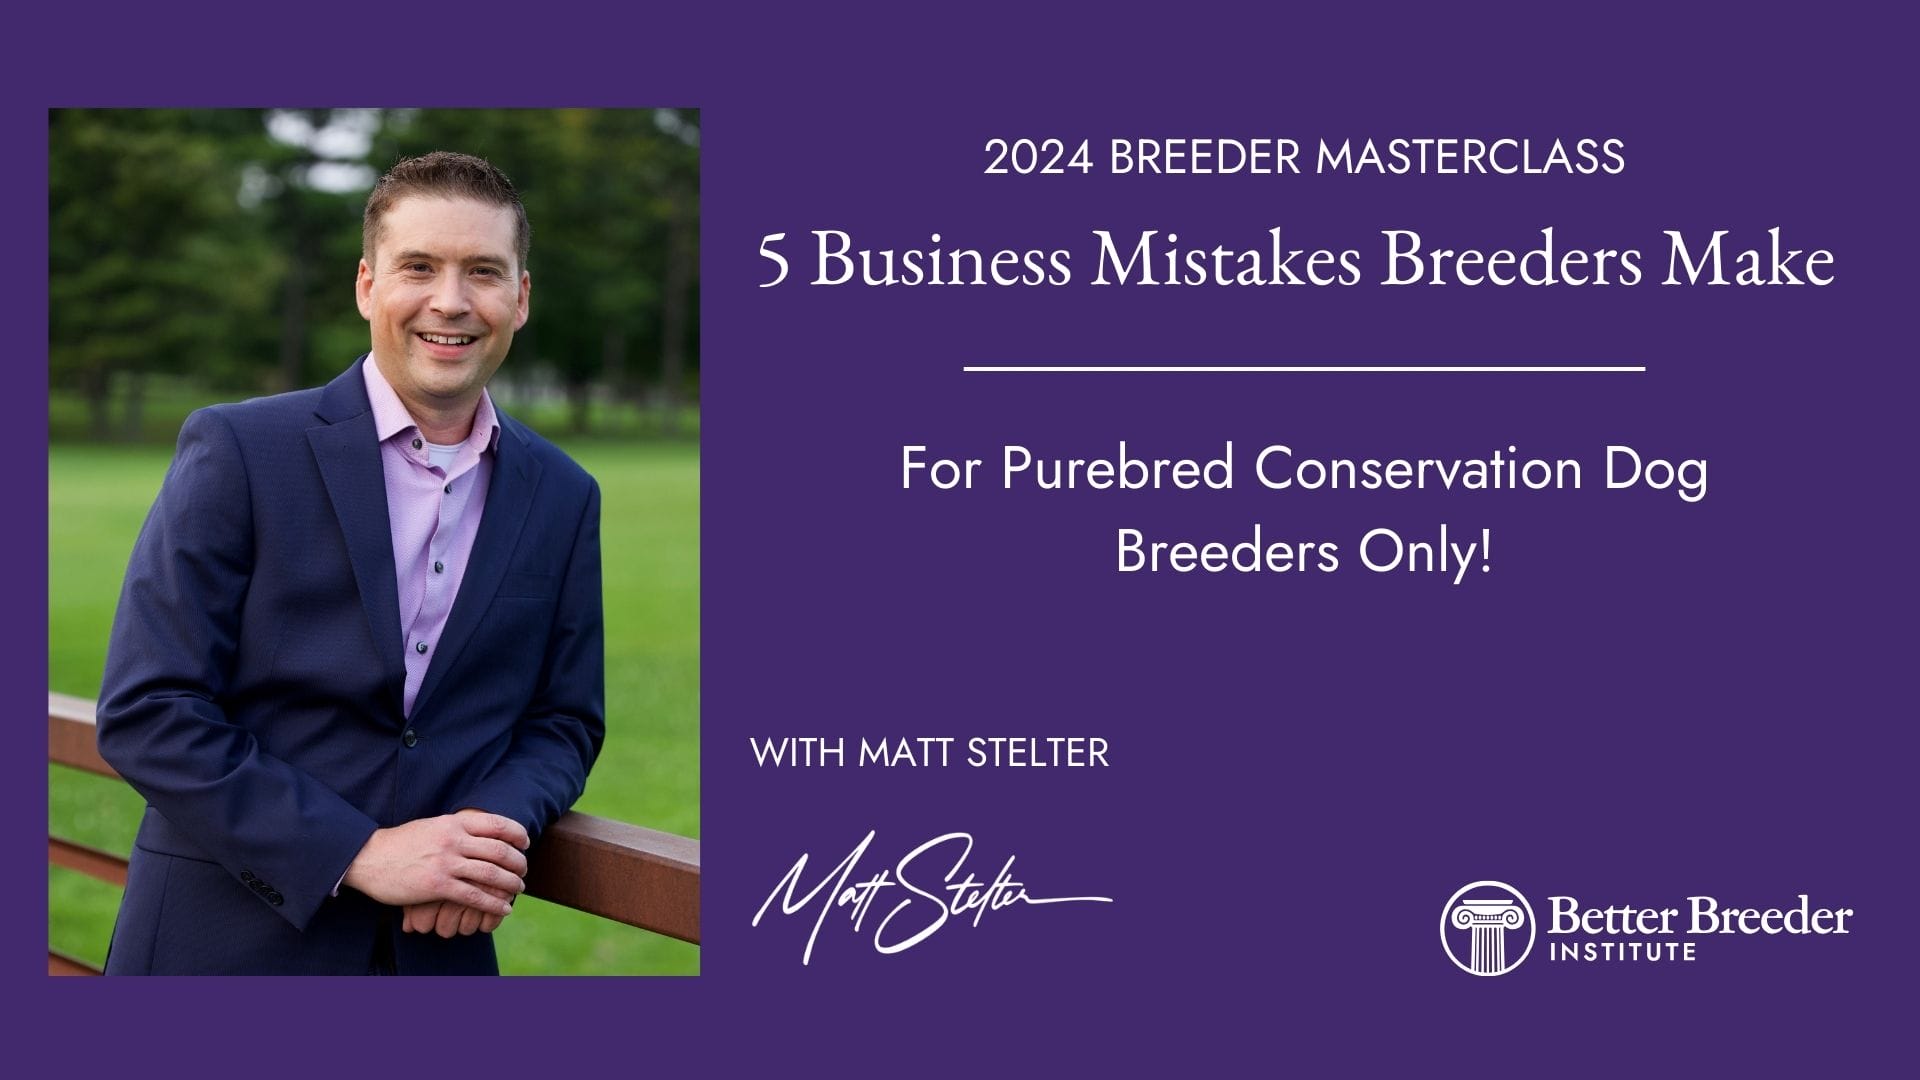 5 Business Mistakes Breeders Make Cover with Matt Stelter